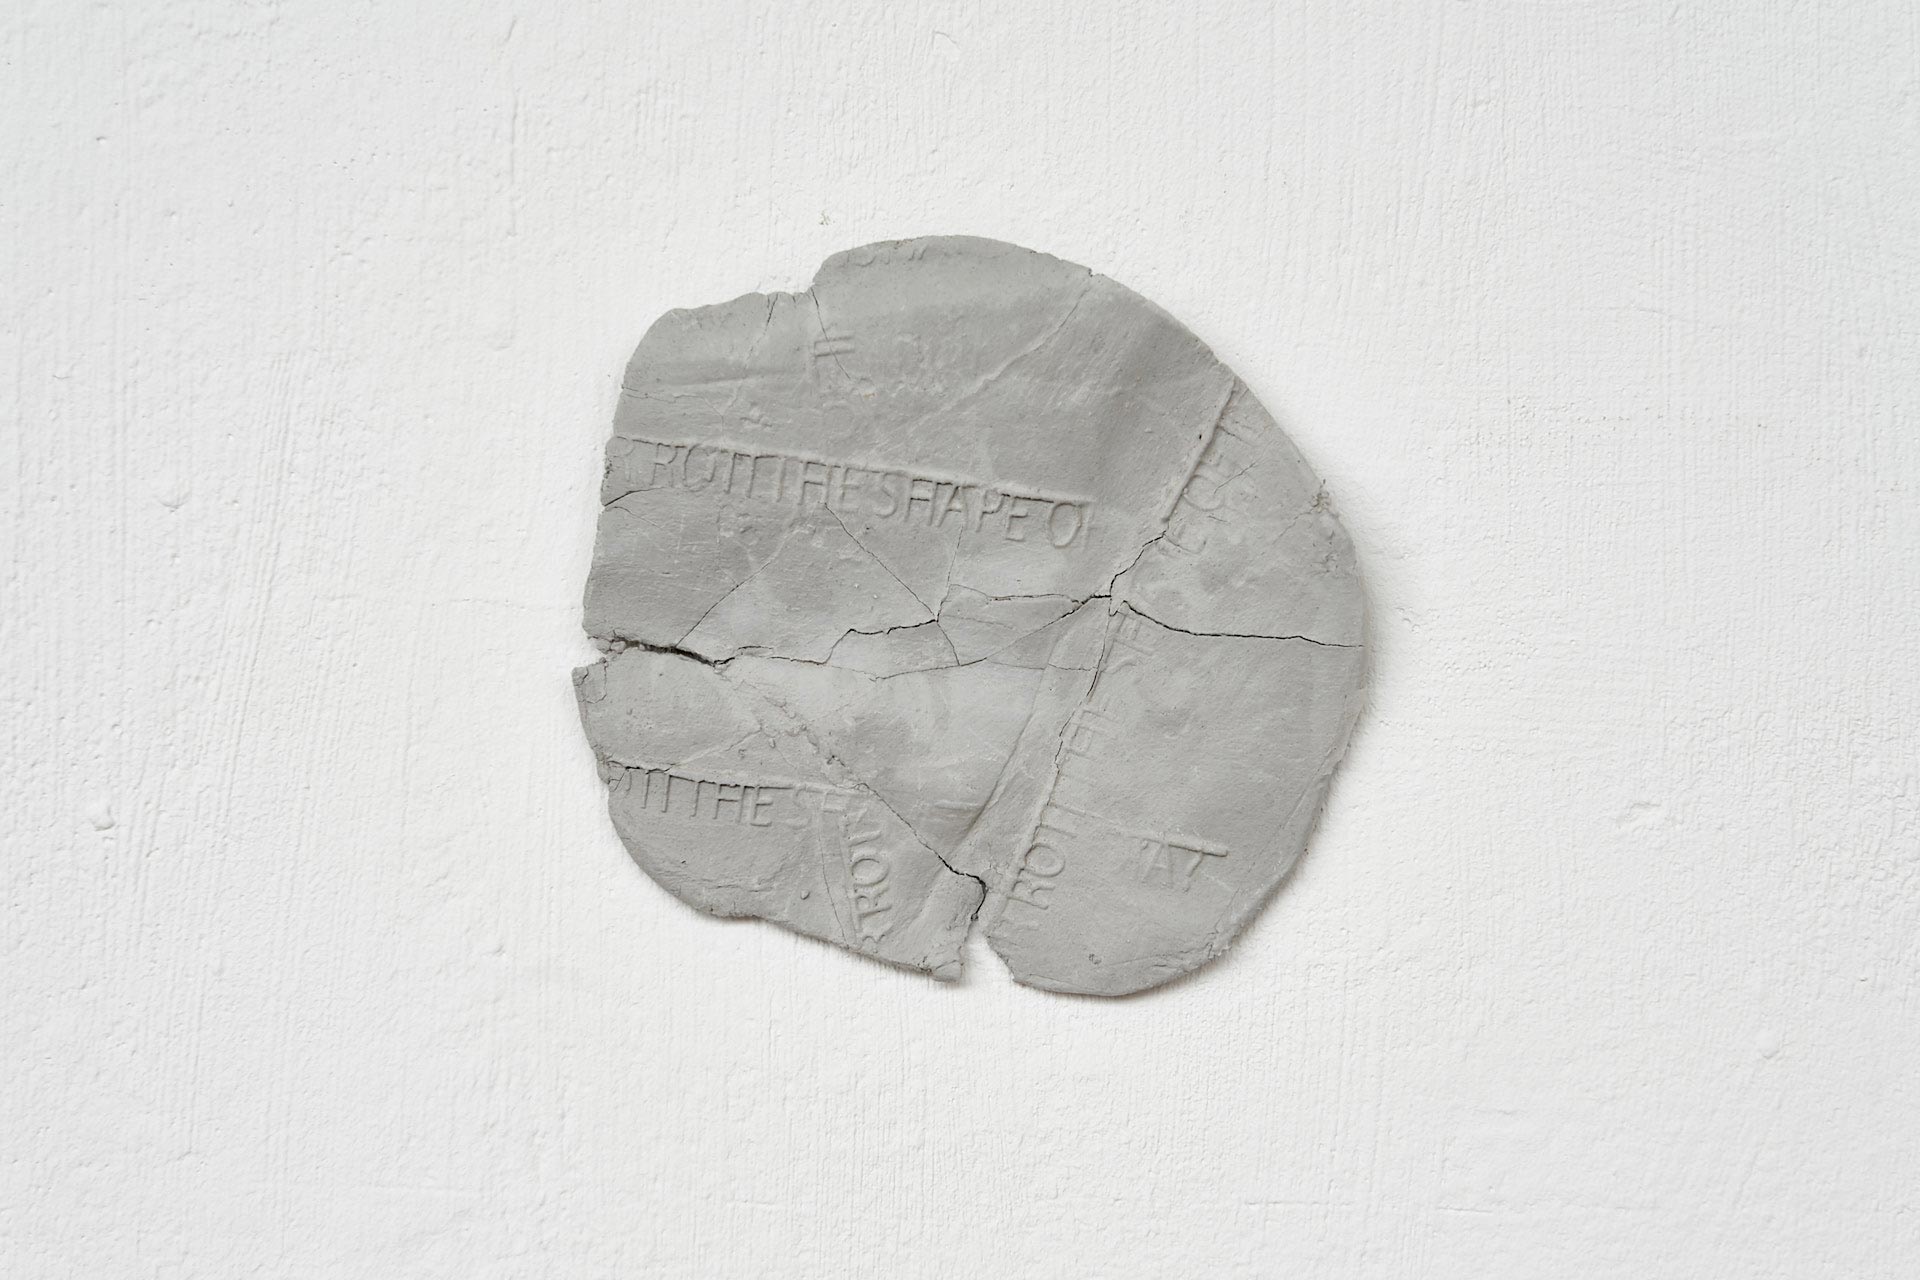 grey circle shaped clay disk on a white wall. The grey circle has the words 'Rotti the shape of' printed onto it.